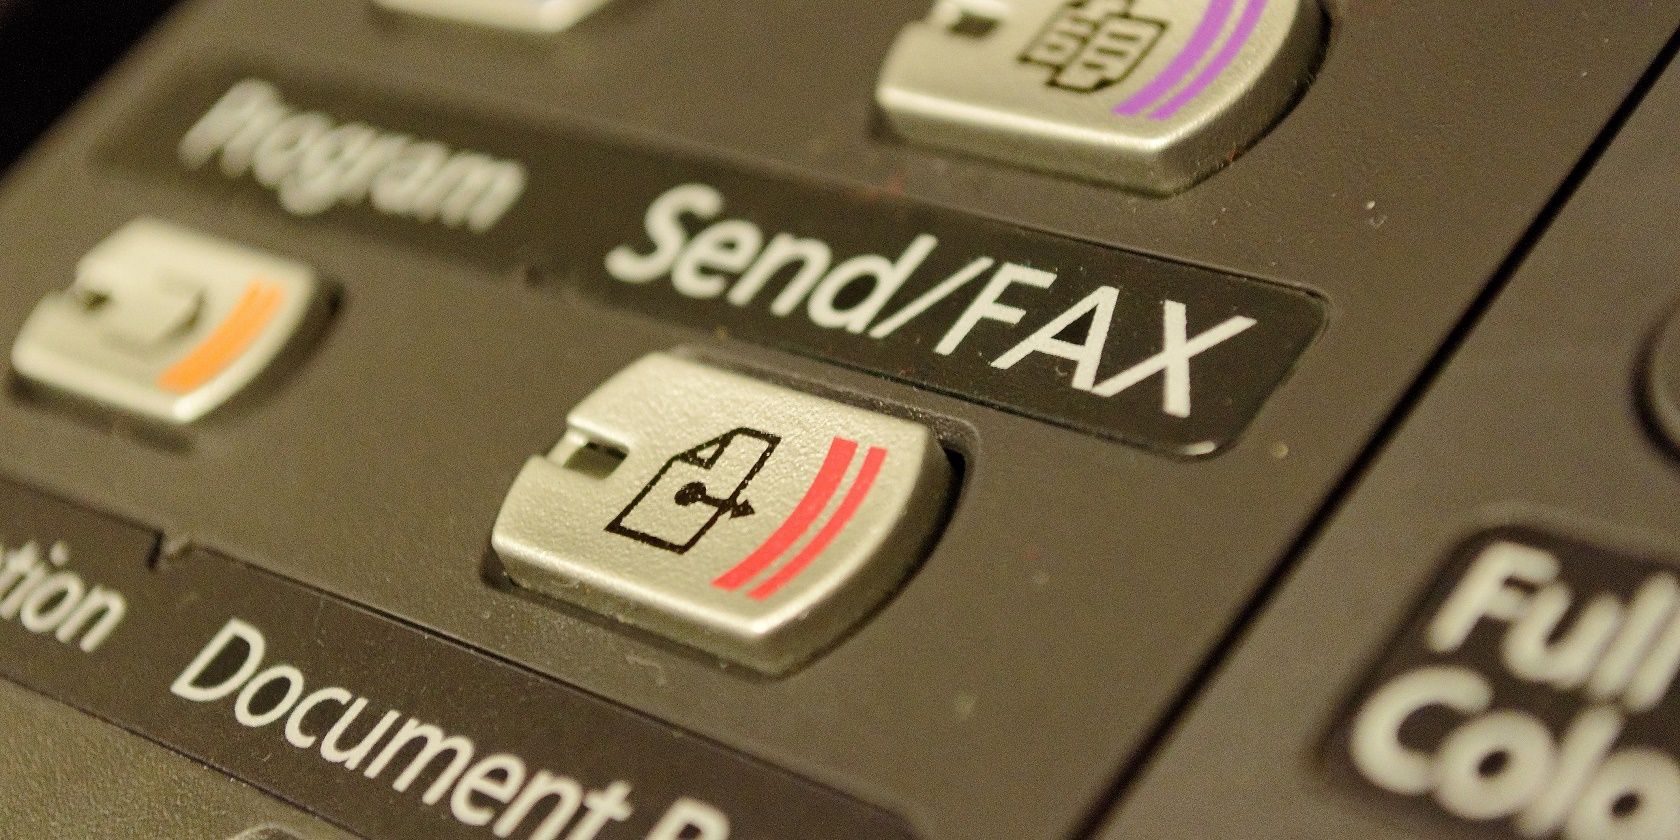 No Fax Machine? No Problem -- Easily Sign And Send Faxes From Your Computer